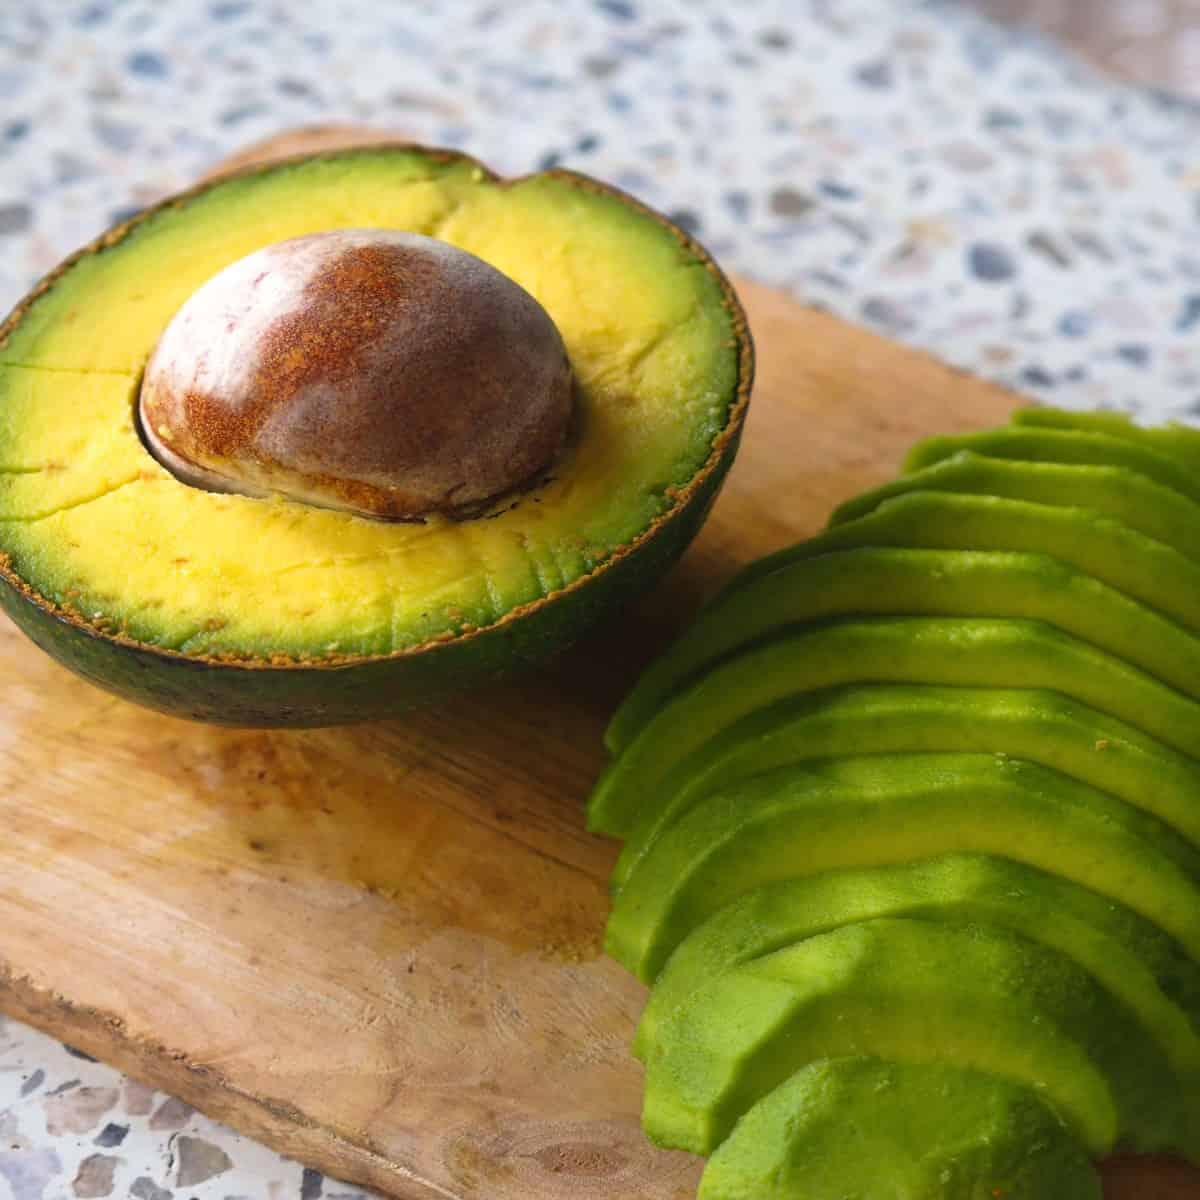 https://tastegreatfoodie.com/wp-content/uploads/2023/07/How-to-Pick-Avocados.jpg